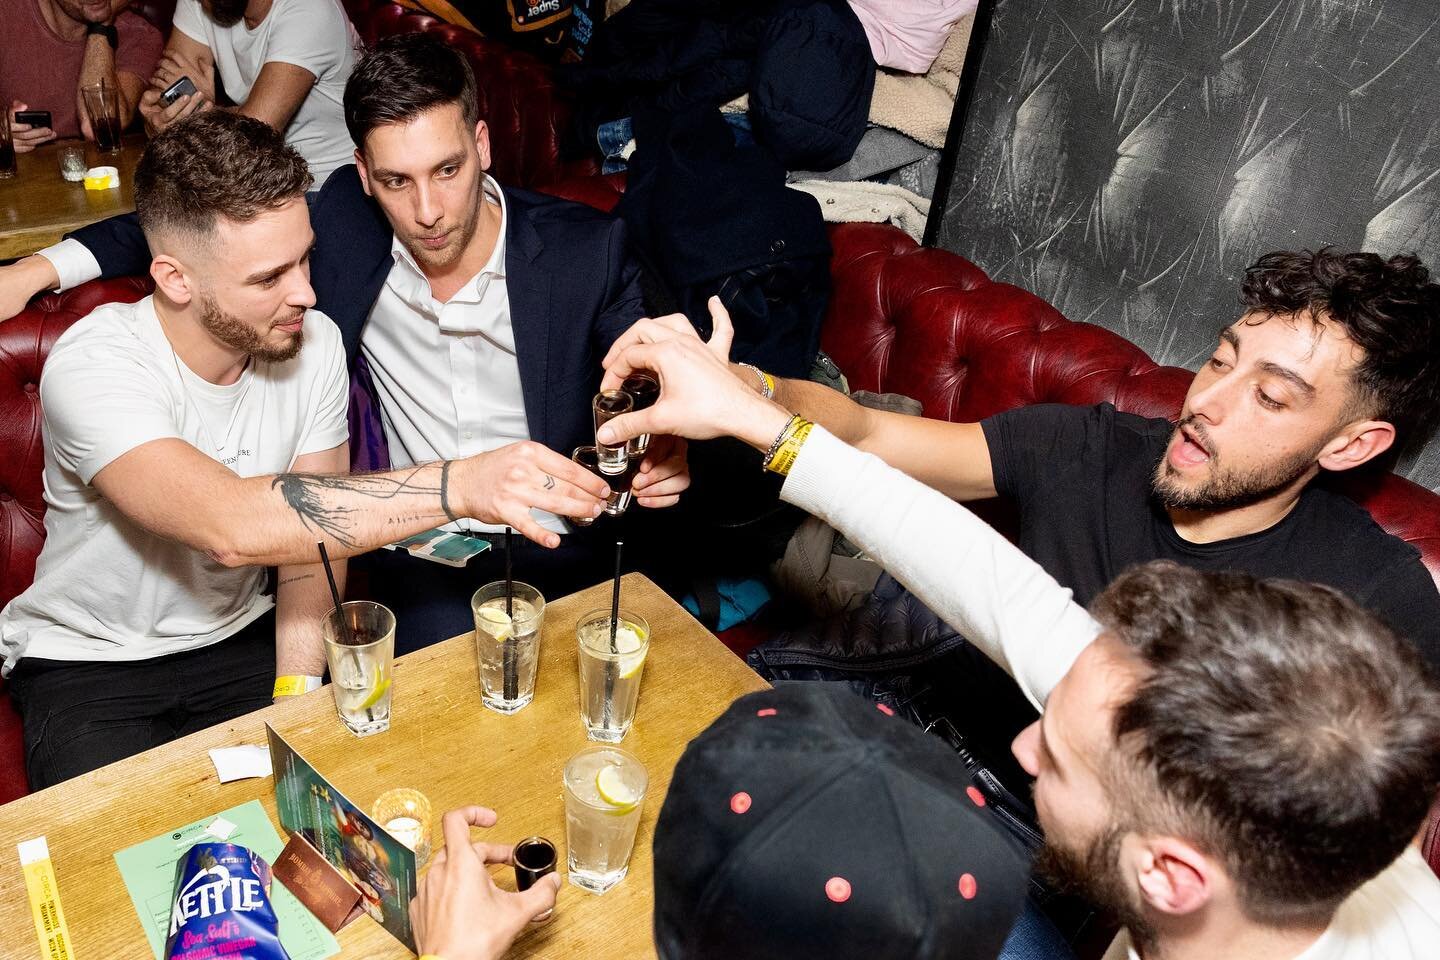 It&rsquo;s always the right time for a round of shots!

We have 3-4-&pound;12 shot deals that run EVERY DAY and 2-4-&pound;12 drinks deals that run to 8pm. 

Come join us for a cheeky one.